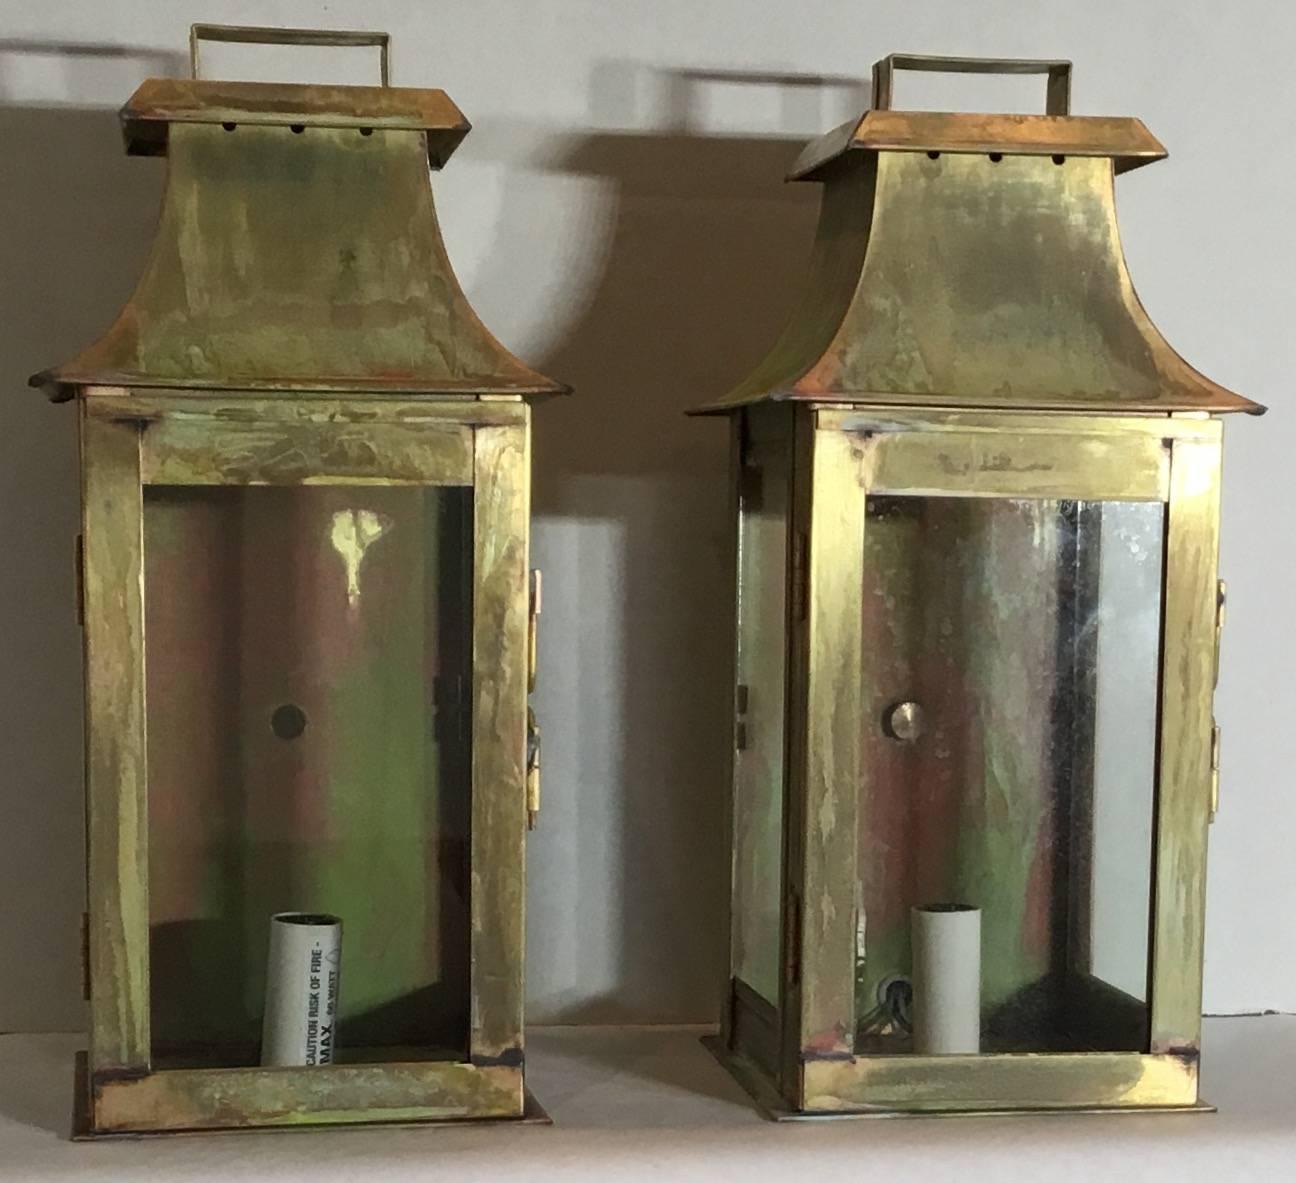 Elegant pair of wall hanging lantern made of brass, with one 60/watt light each.
Suitable for wet locations
UL approved, up to US code very good quality lanterns, made in the USA.